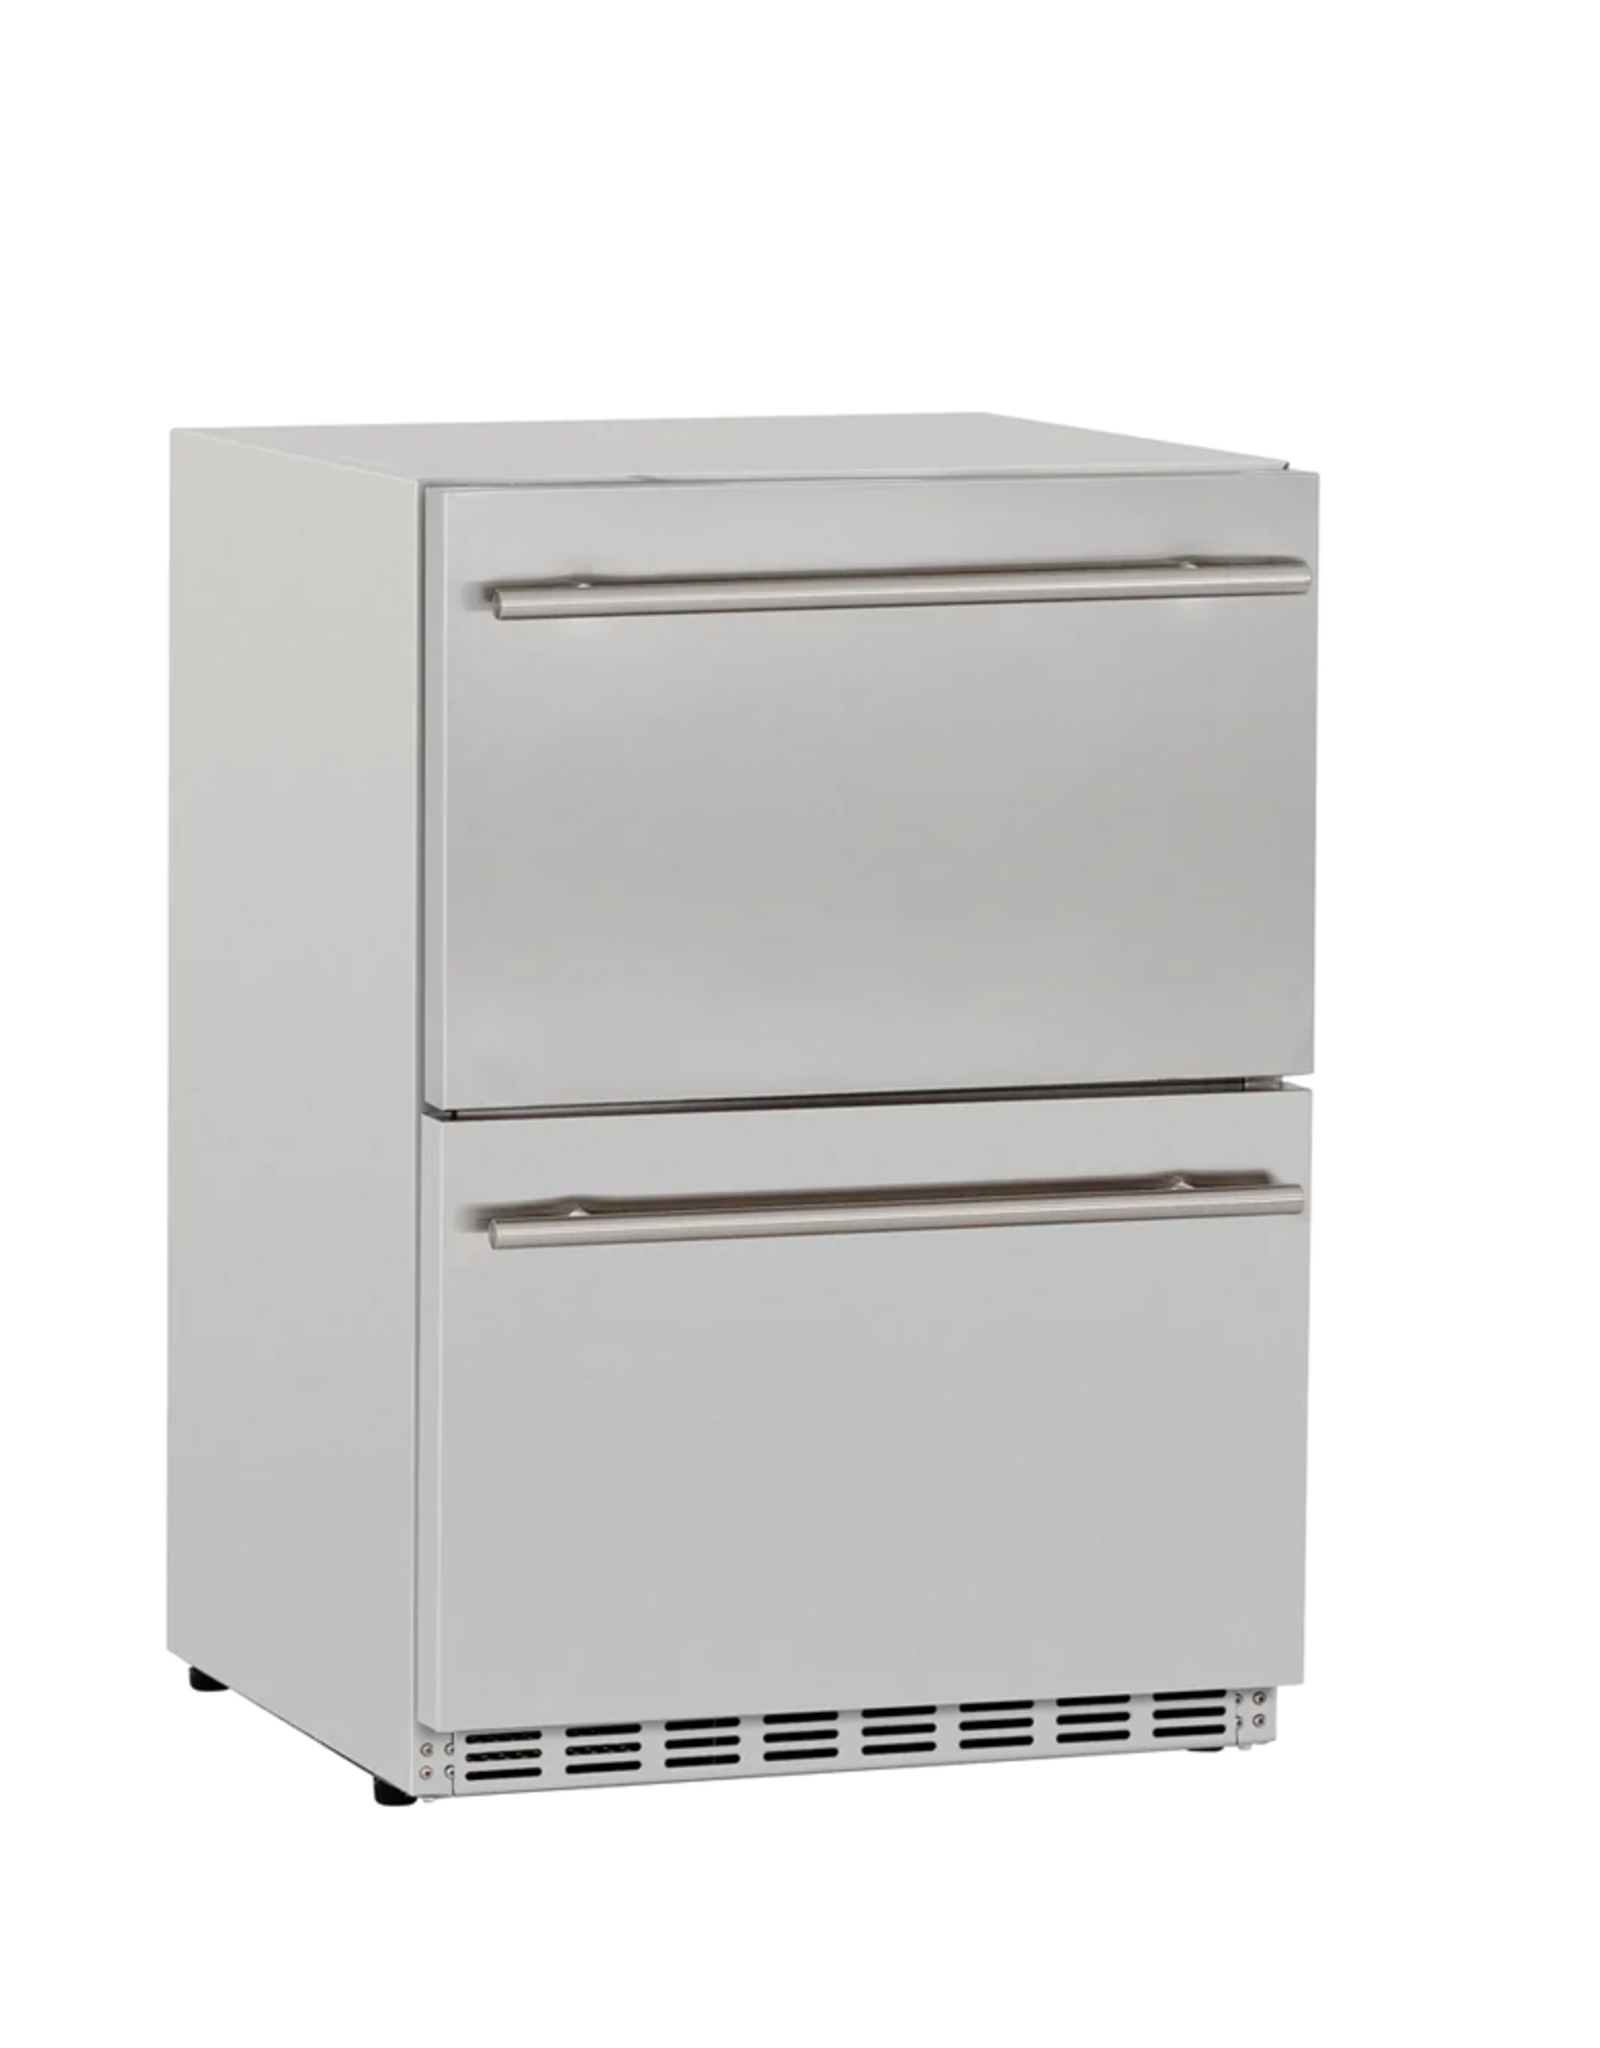 Renaissance Cooking Systems Renaissance Cooking Systems Dual Drawer Refrigerator - REFR4